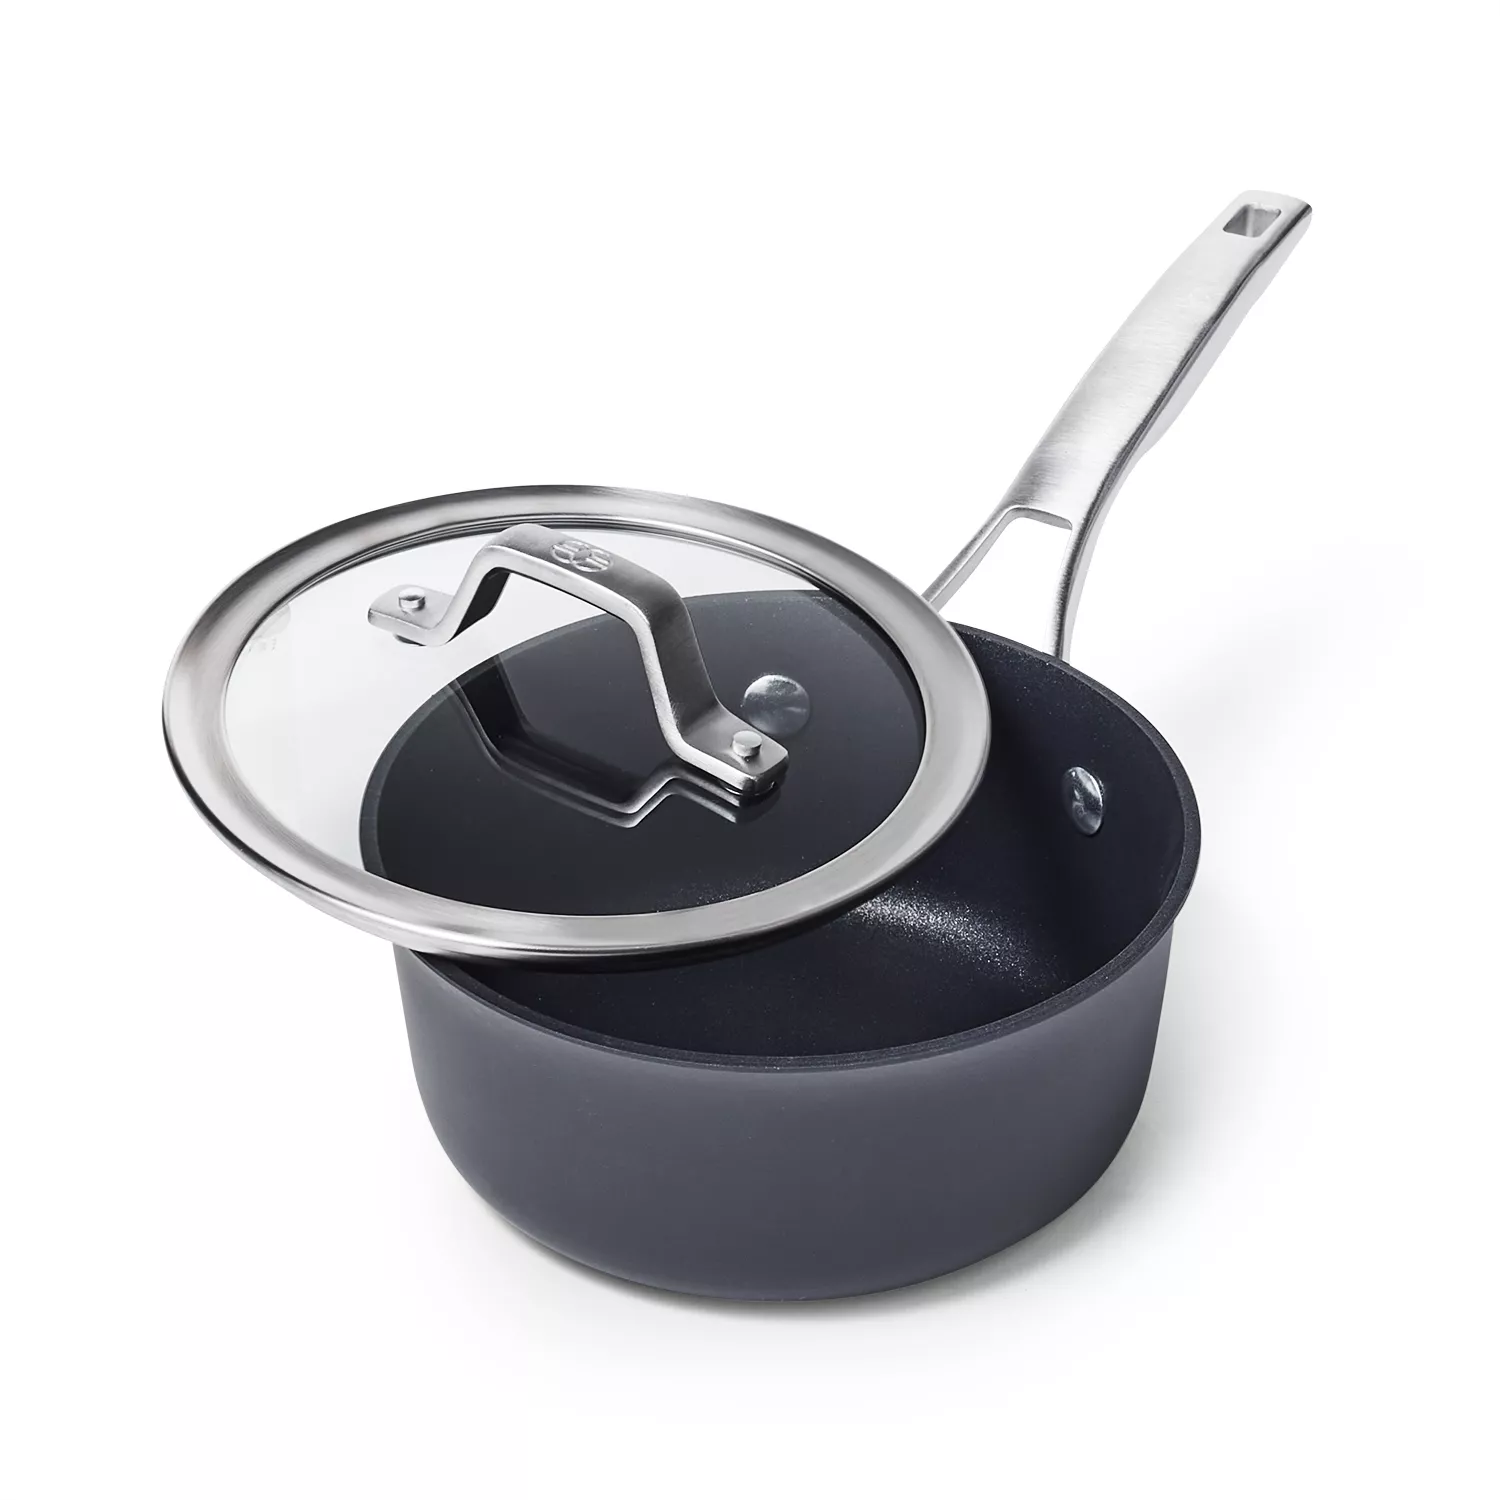 Calphalon® Classic™ Hard-Anodized Nonstick 1.5-Quart Sauce Pan with Cover